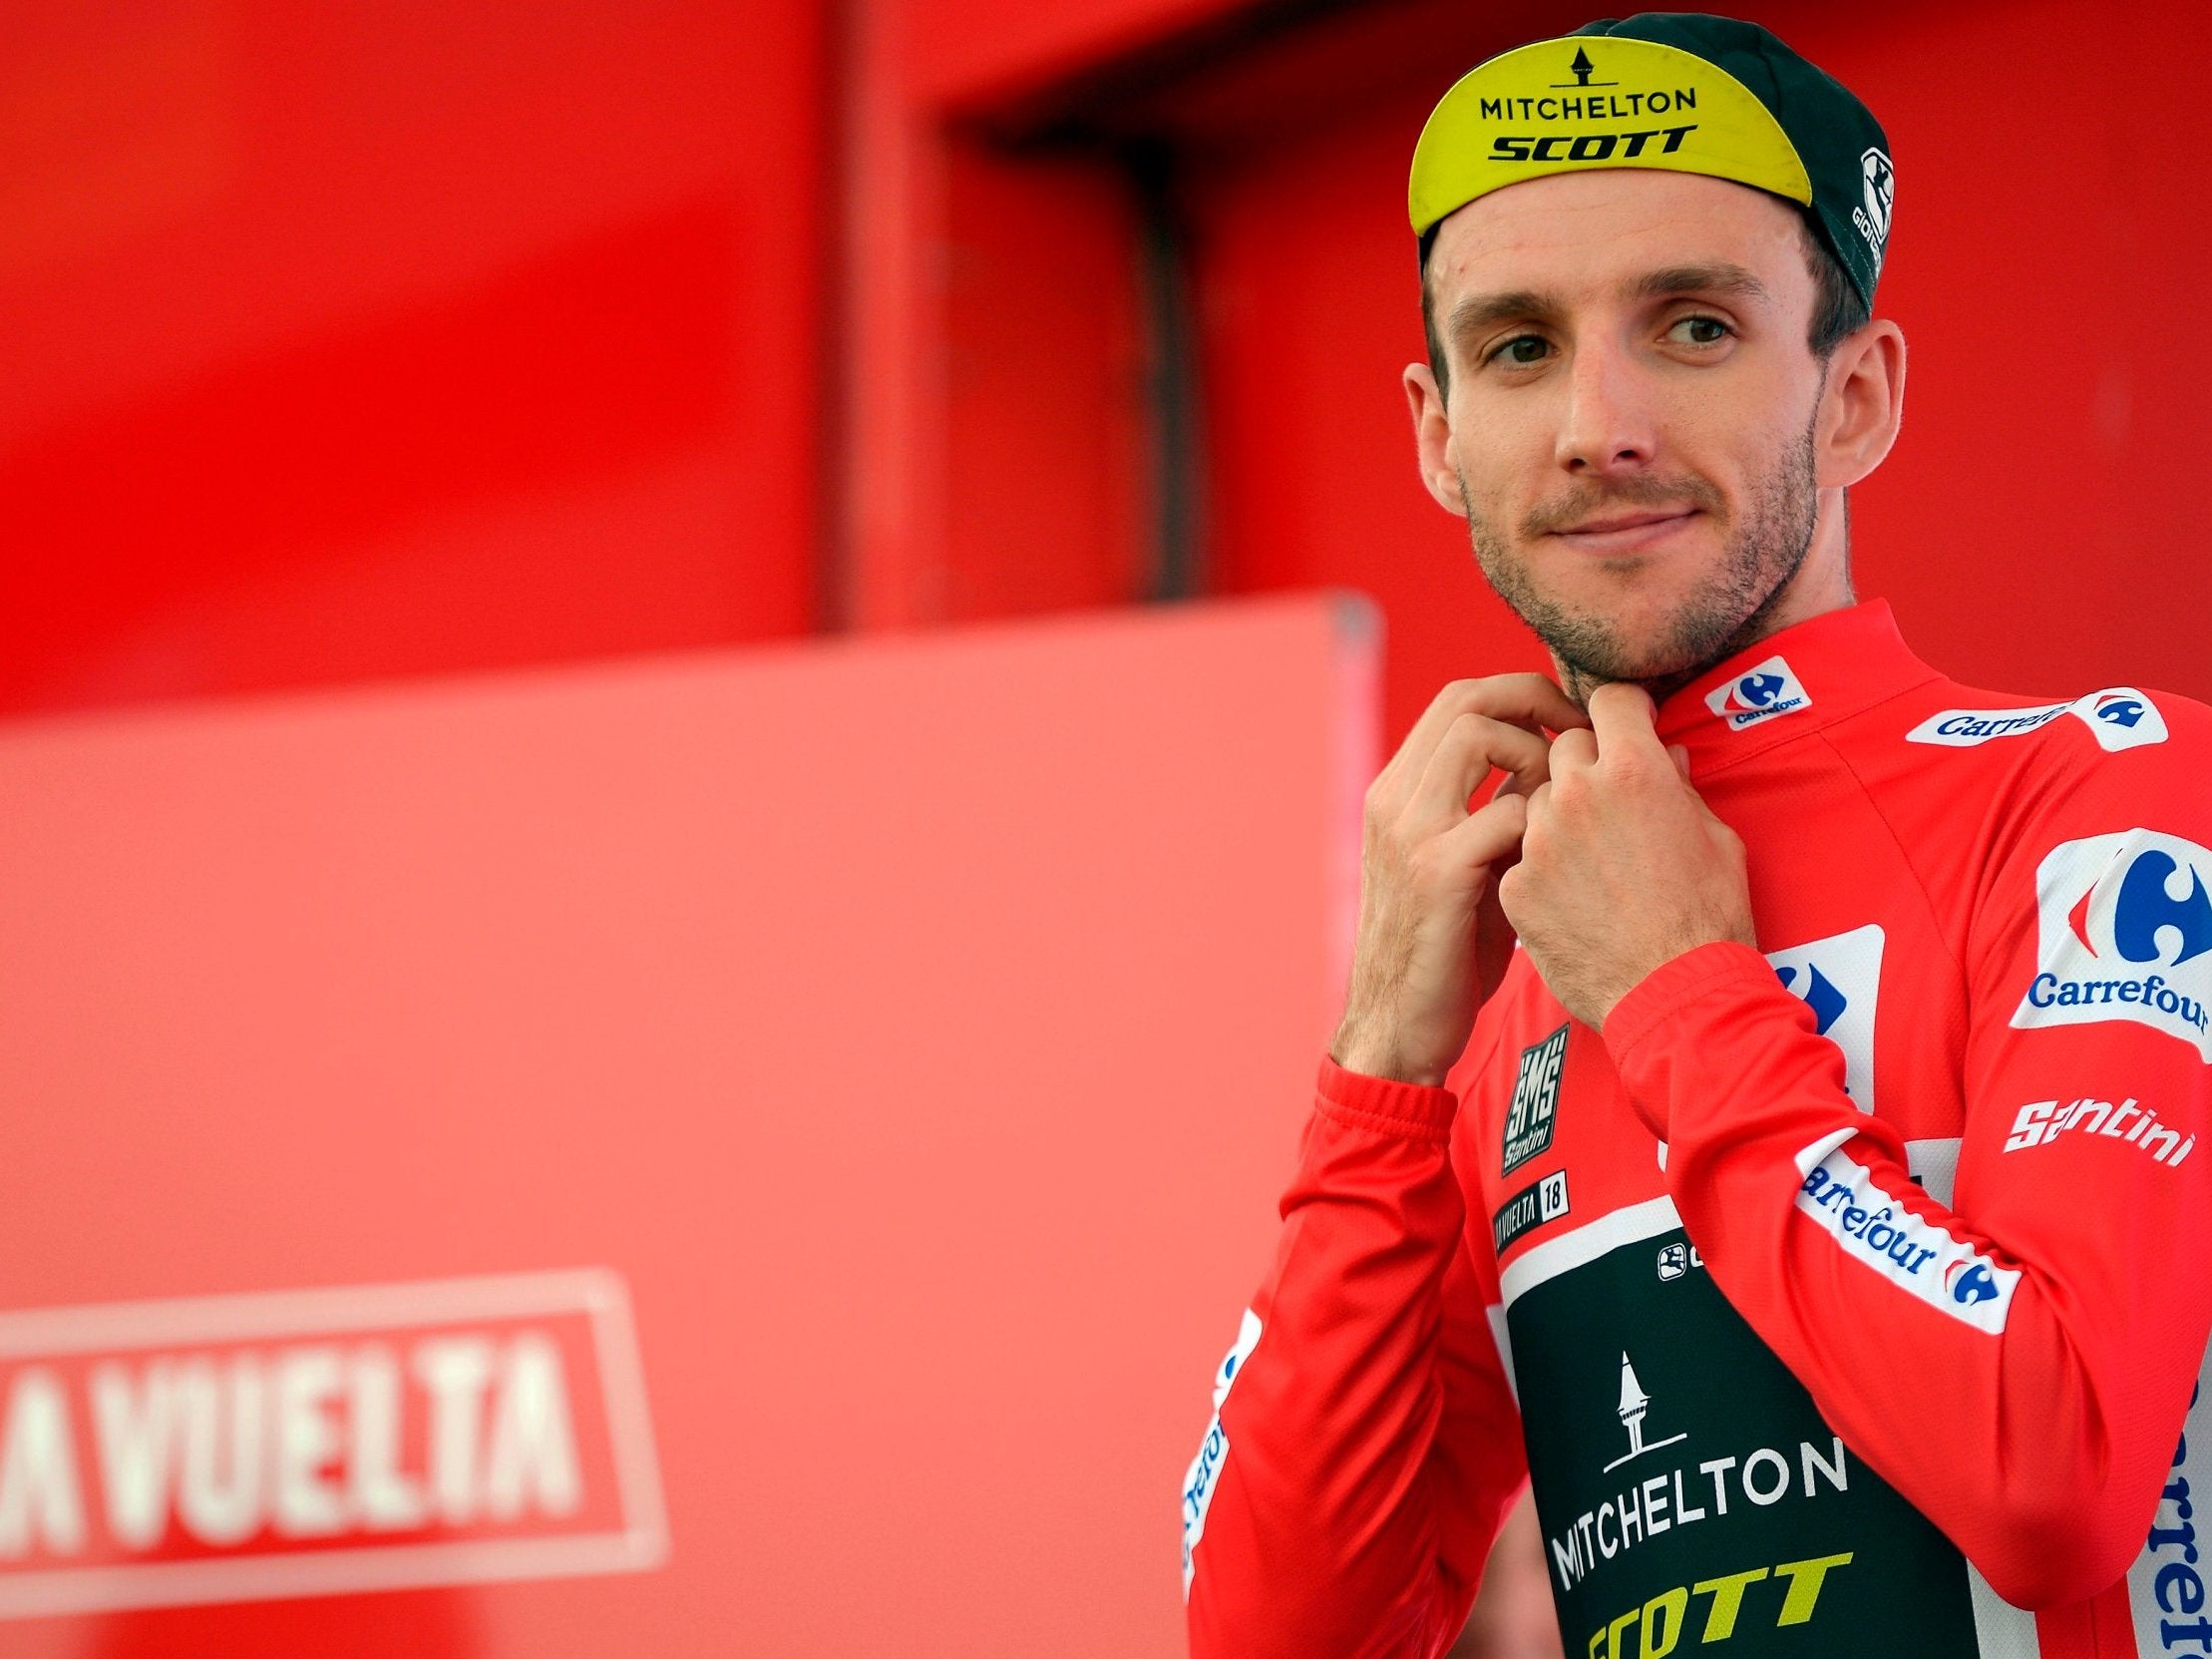 Simon Yates clinched the red jersey with a controlled performance